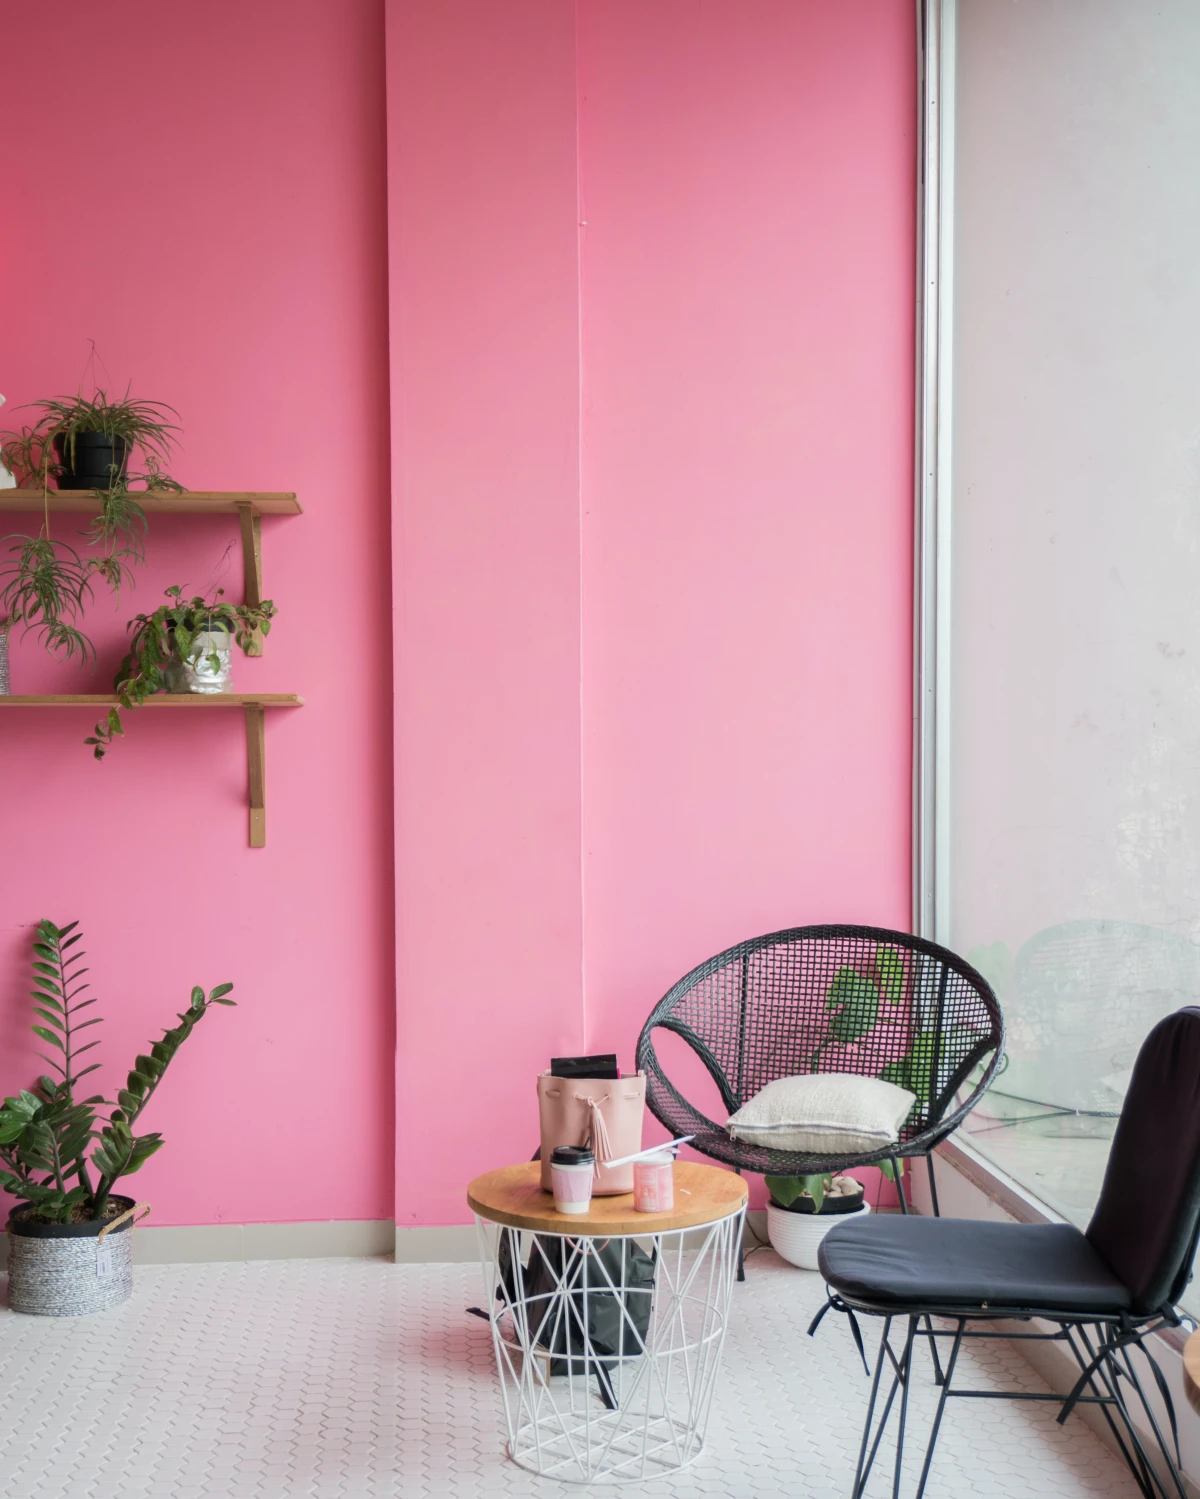 outdated bedroom paint colors bright pink wall